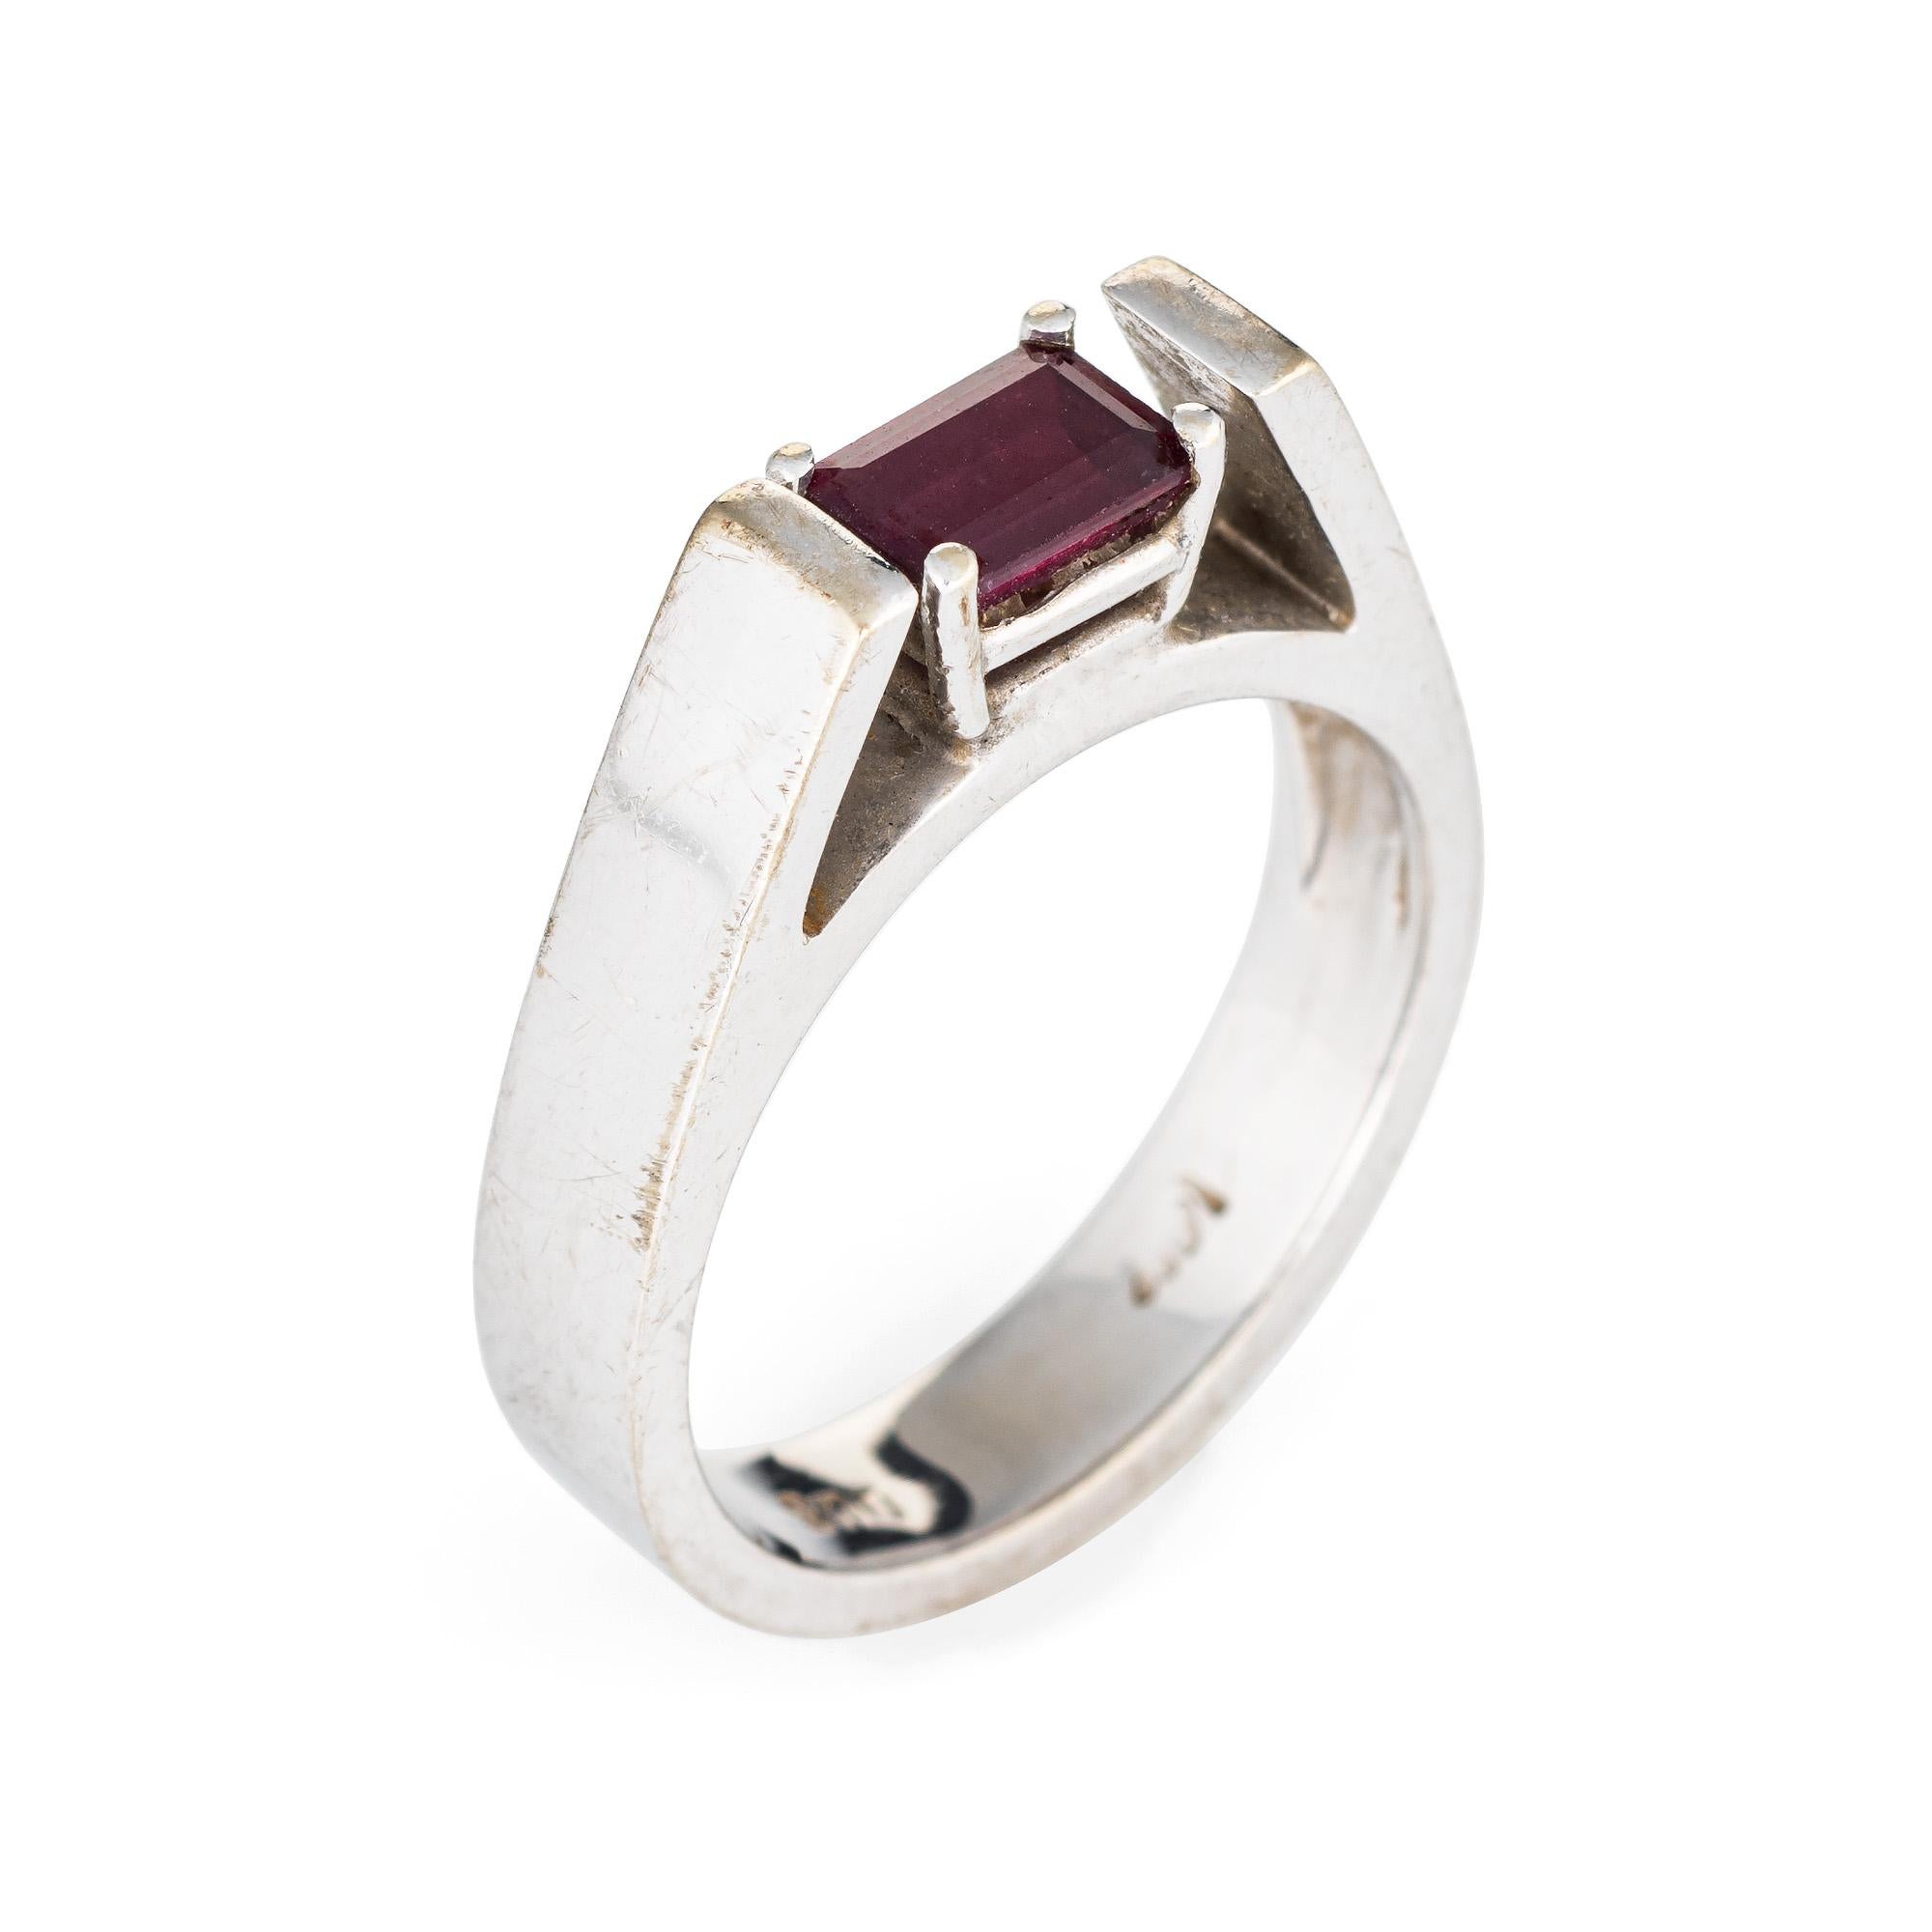 Stylish vintage rhodolite garnet ring (circa 1970s) crafted in 14 karat white gold. 

Rhodolite garnet measures 6mm x 4mm (estimated at 0.50 carats). The garnet is in excellent condition and free of cracks or chips. 

The raspberry hued garnet is